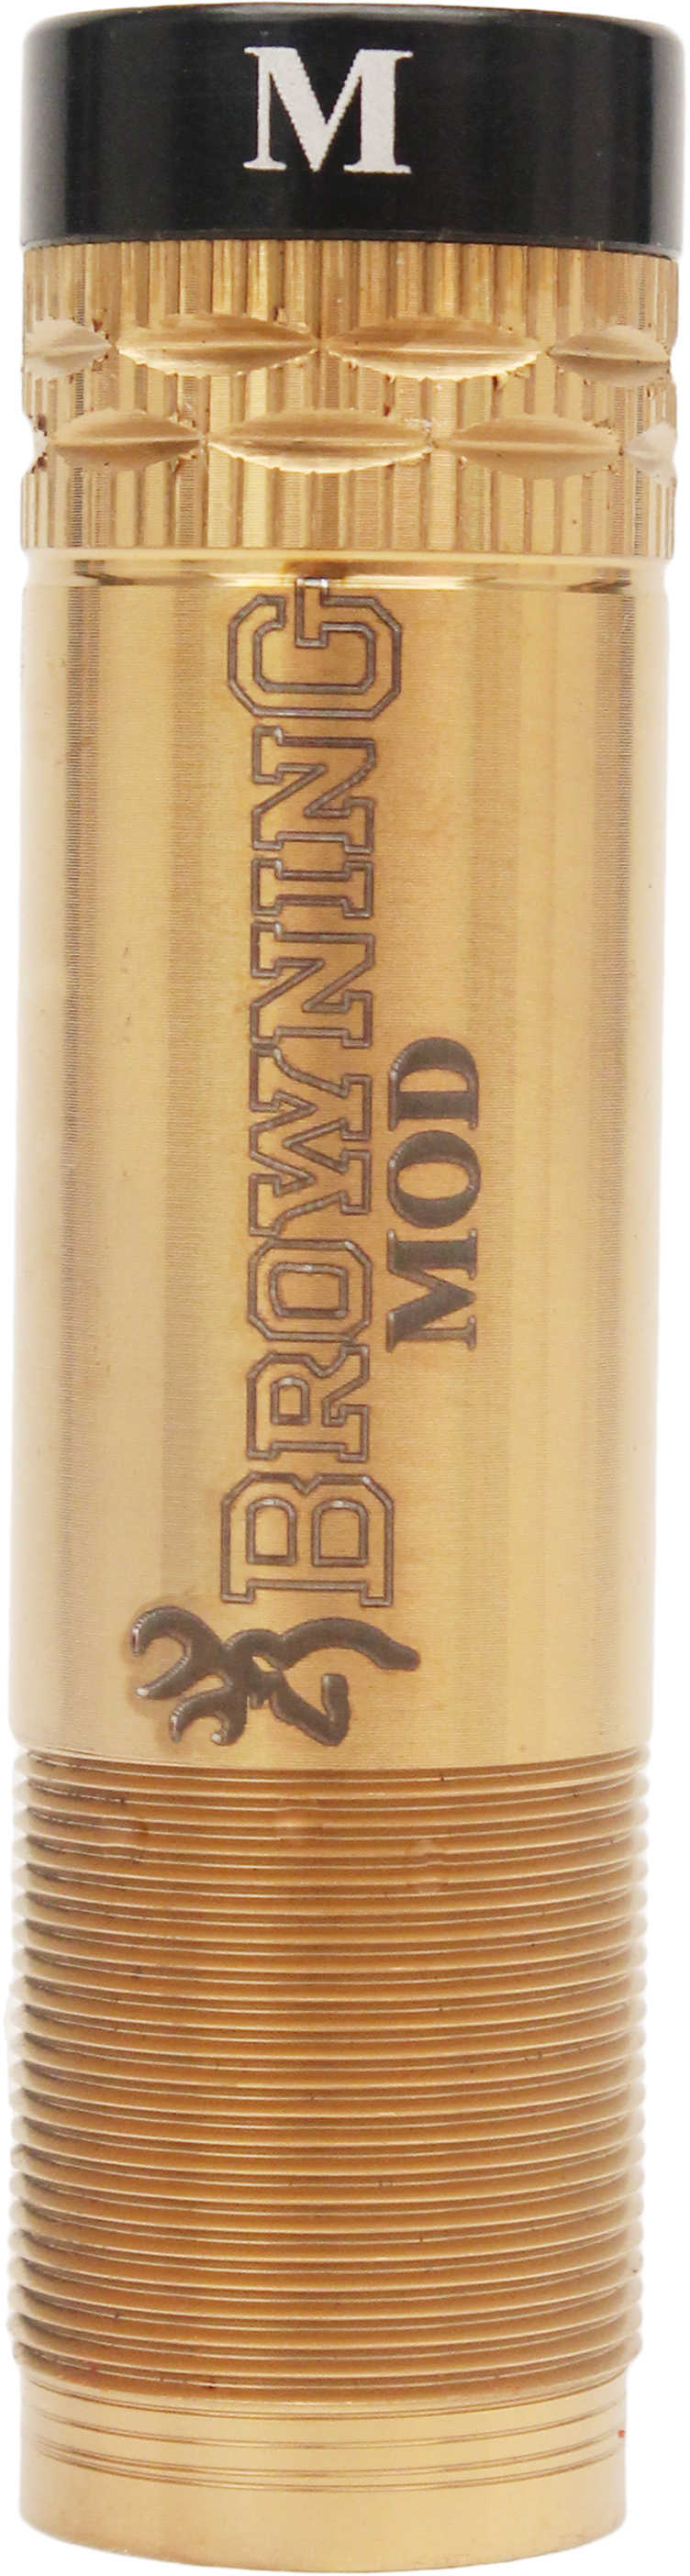 Browning Diana Grade Extended Choke Tubes, 20 Gauge Modified 1131073